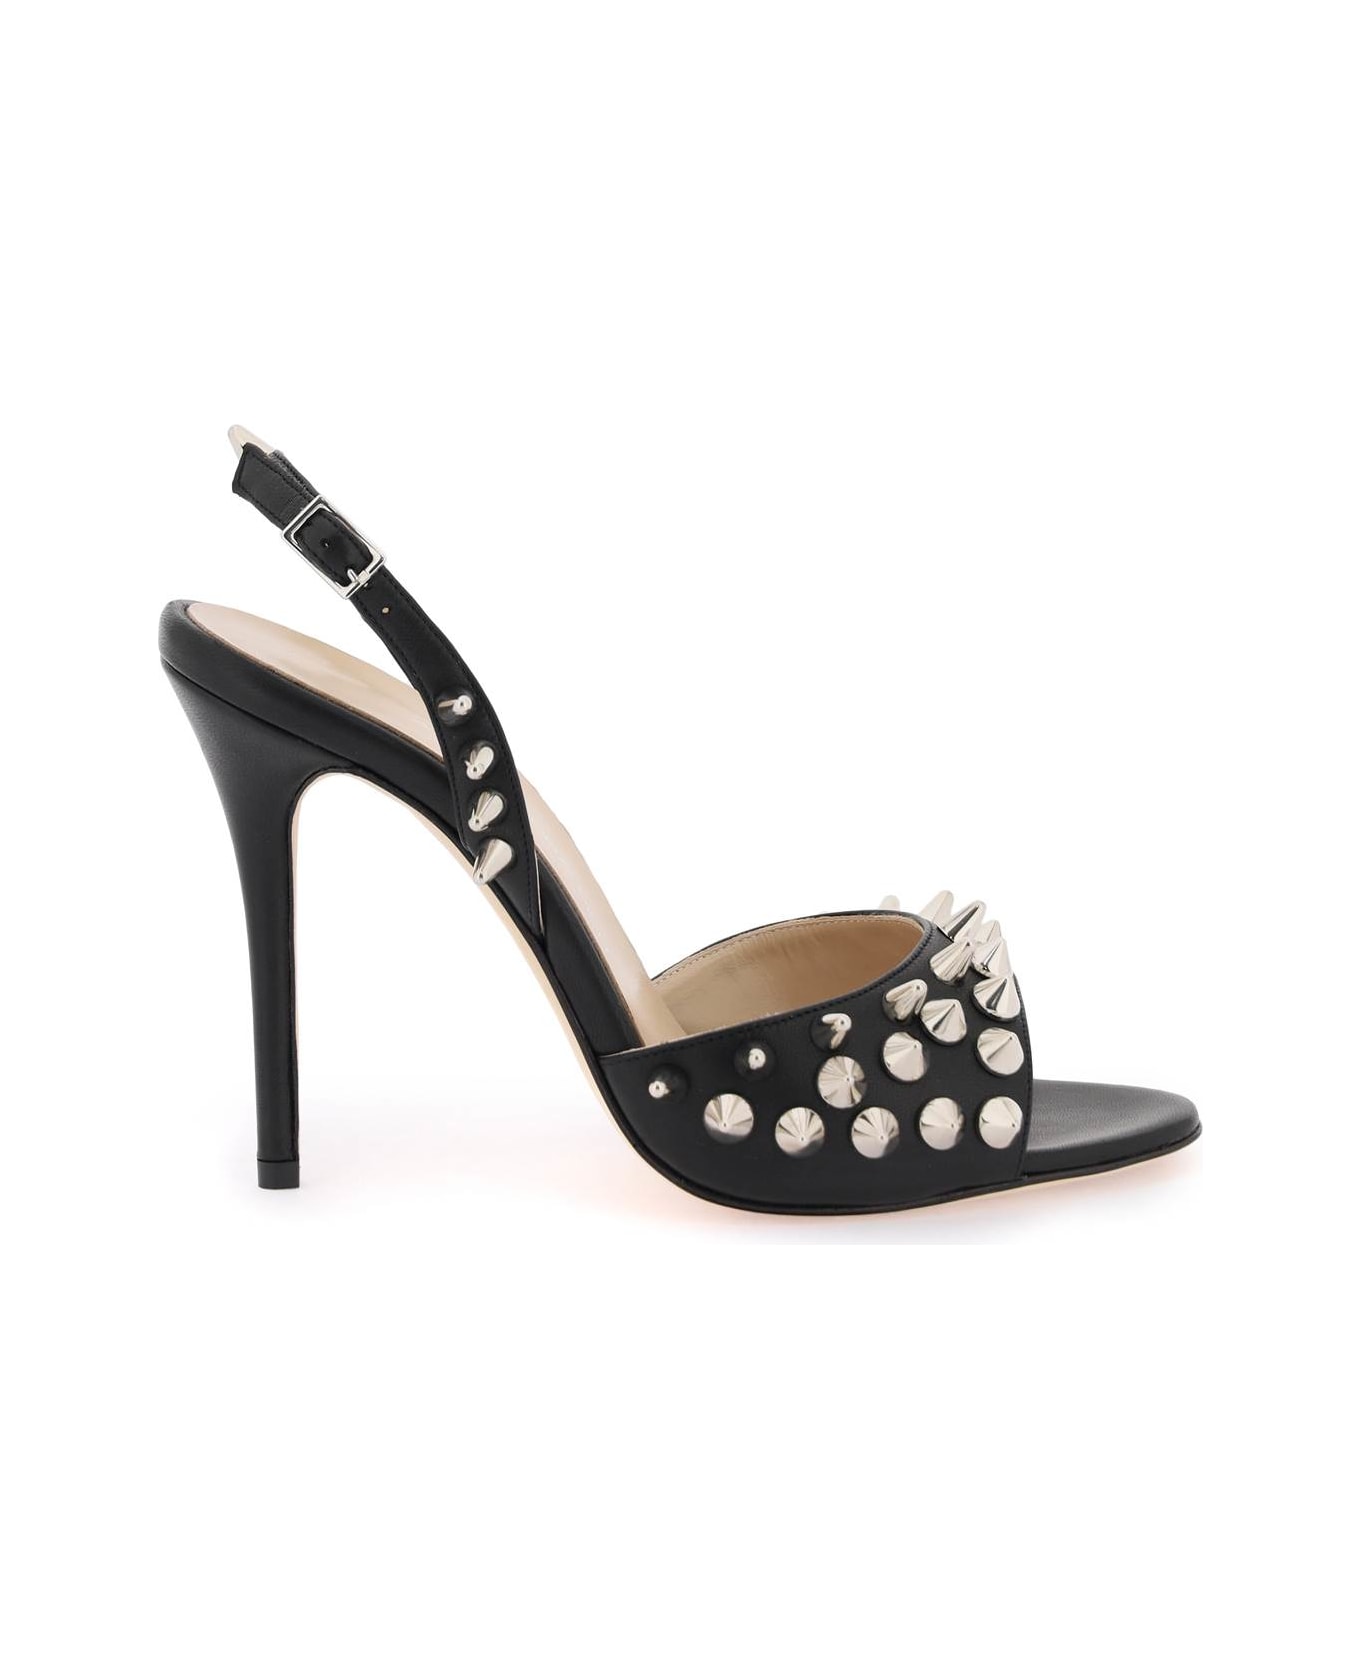 Alessandra Rich Sandals With Spikes - BLACK (Black)